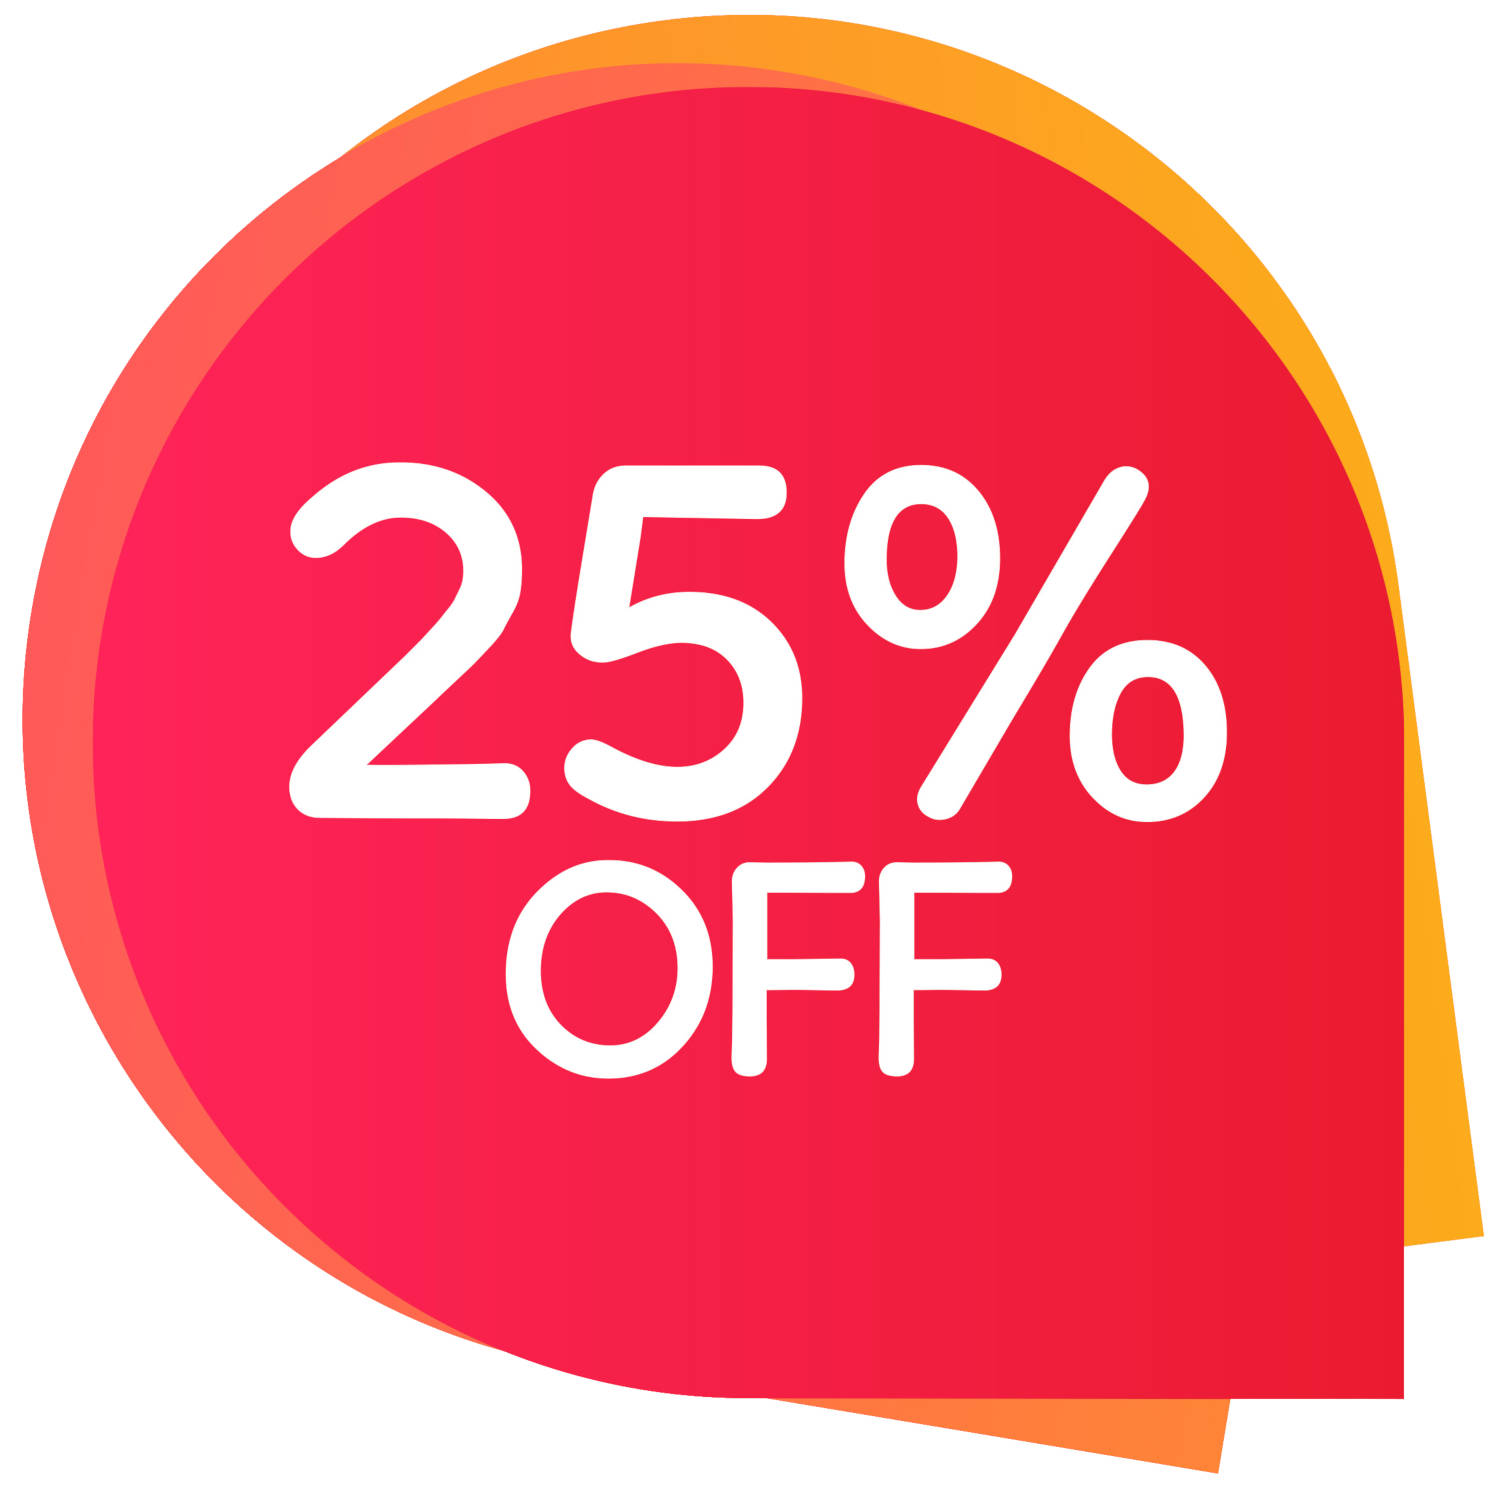 Graphic showing a 25 percent off discount